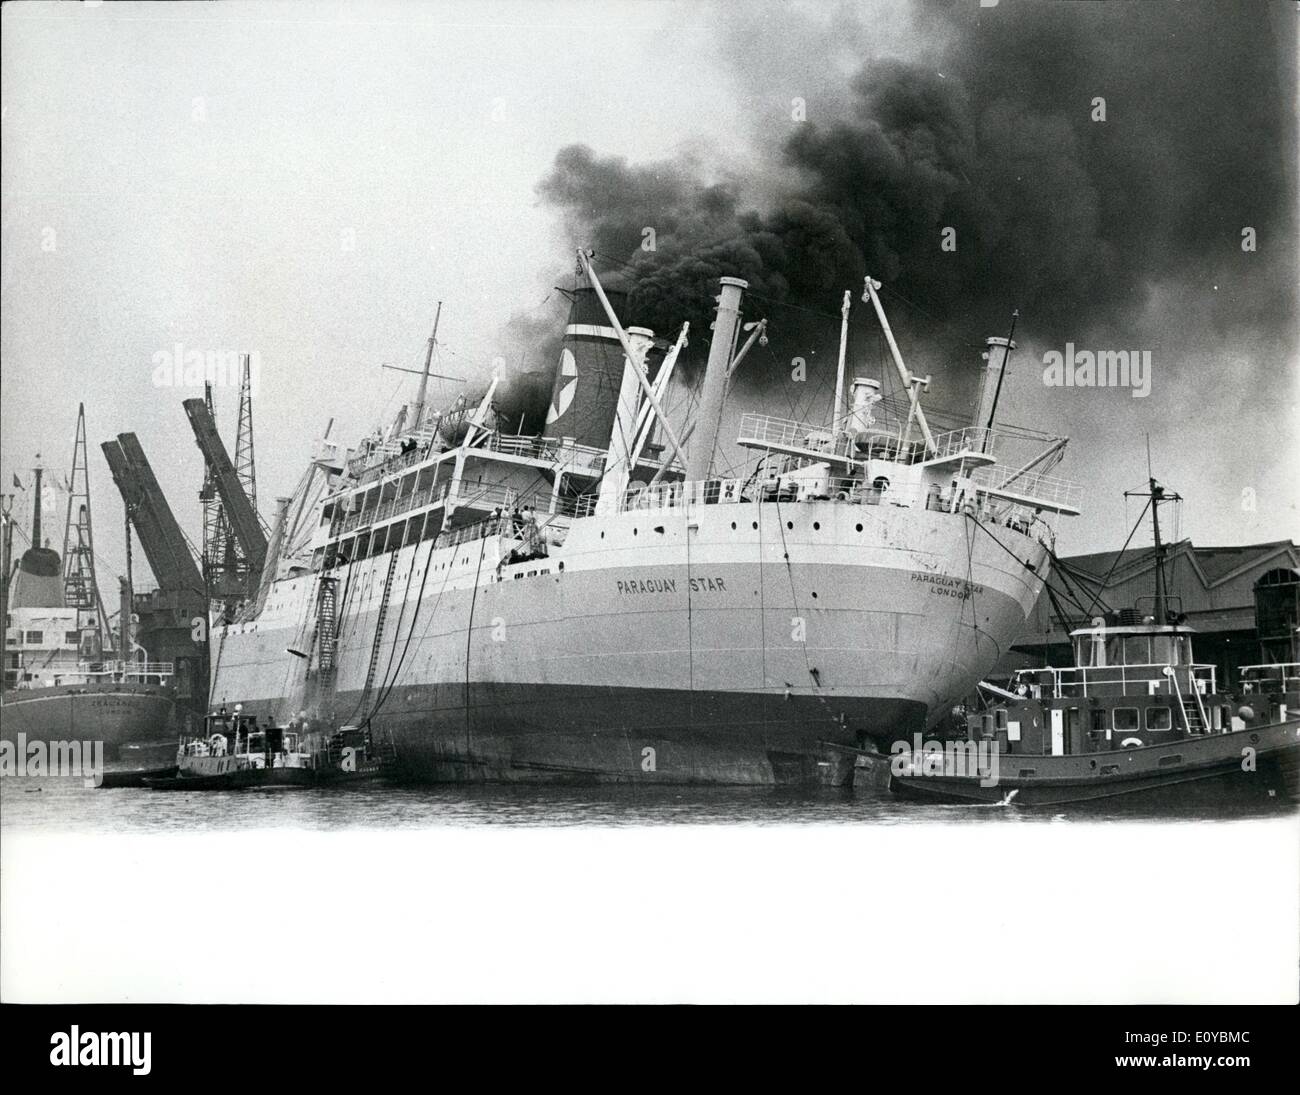 Aug. 08, 1969 - Firemen Fight Ship Blaze: 100 iremen fought for 12 hours to bring under control a fire which broke out at dawn yesterday in the engine room of the British Blue Star Line cargo ship Paraguay Star, 10,722 tons, in London's Royal Victoria Docks. The ship developed a list and the heat was so intense that it blistered the hull's paintwork, Photo shows Smoke pours from the Paraguay Star in London Royal Victoria Docks yesterday. Stock Photo